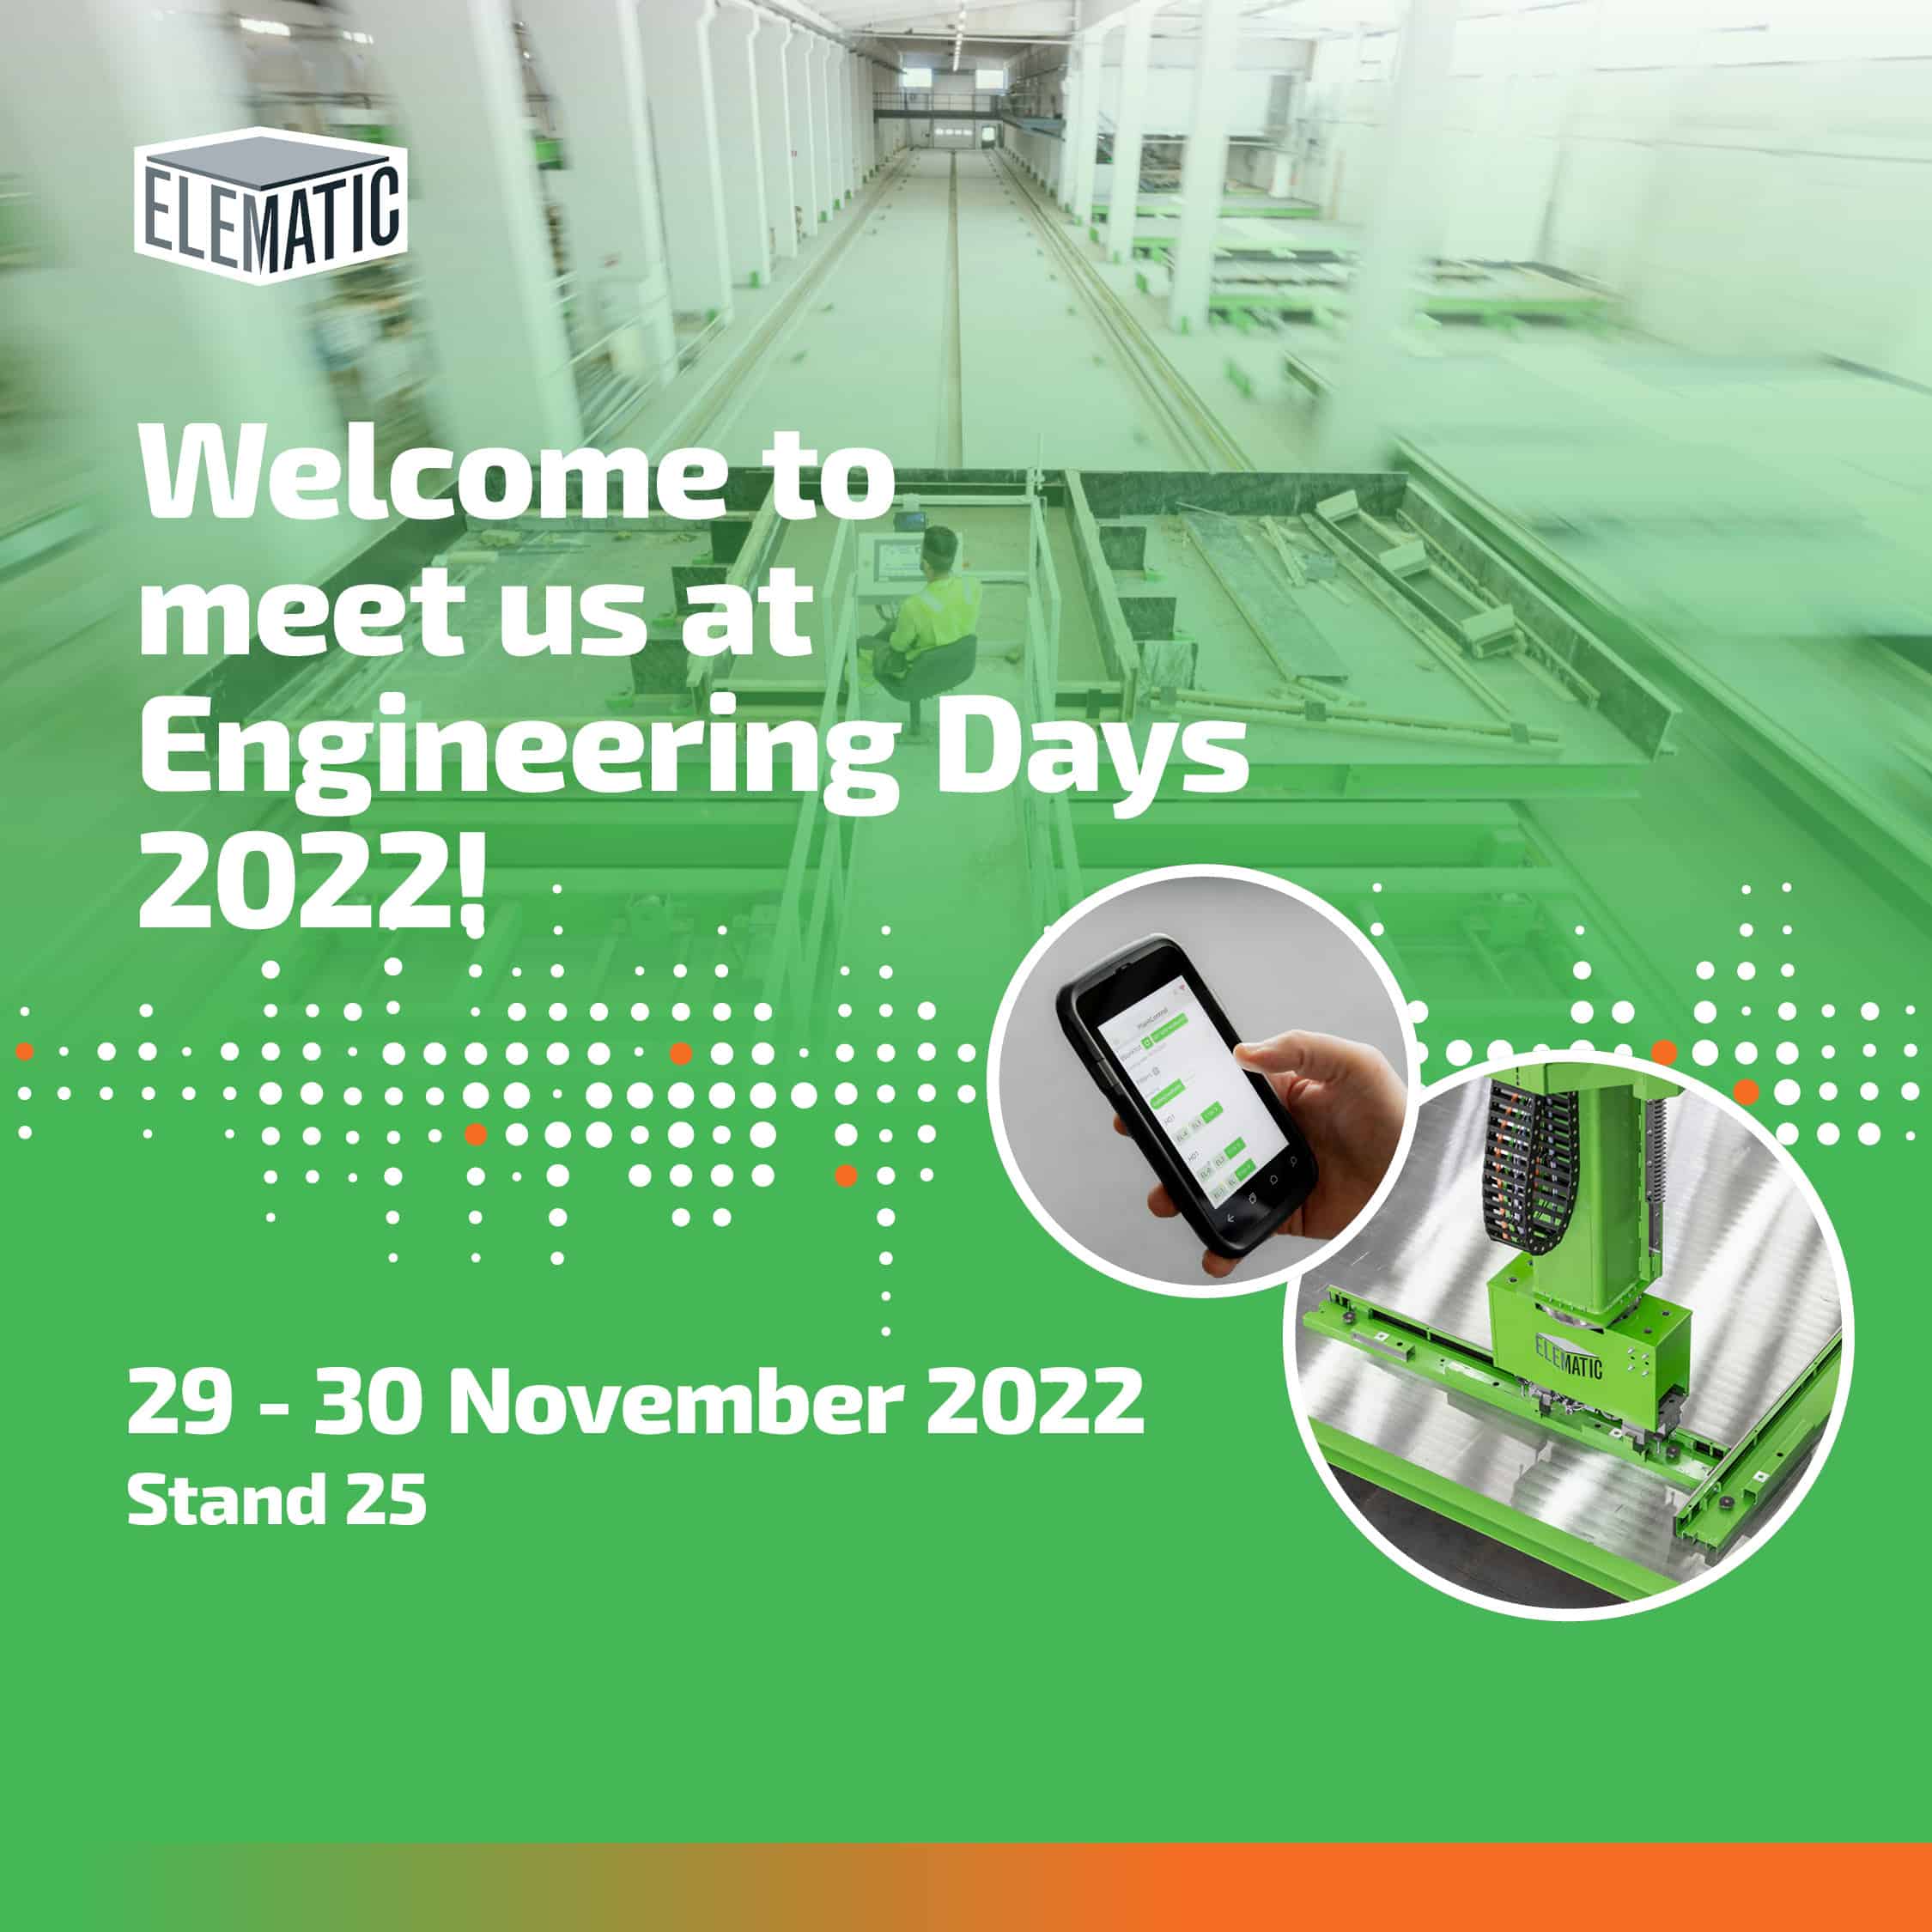 Welcome to meet us at Engineering Days 2022